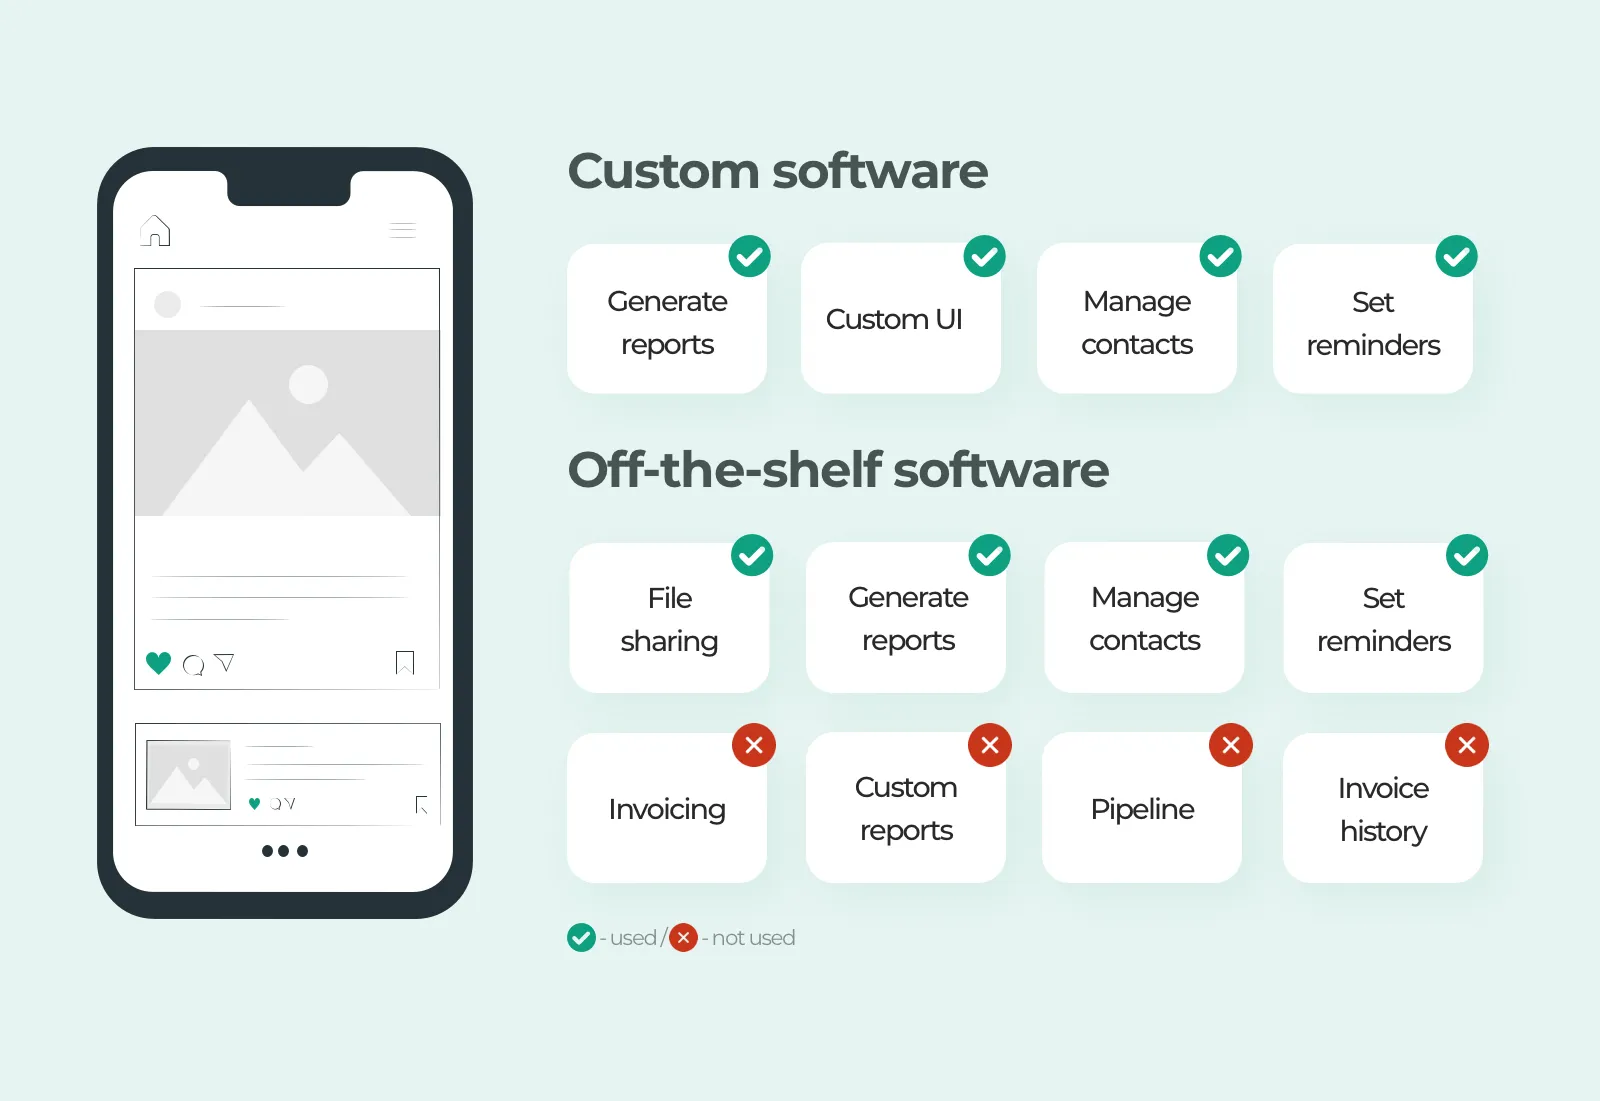 The difference between the features of custom and off-the-shelf software